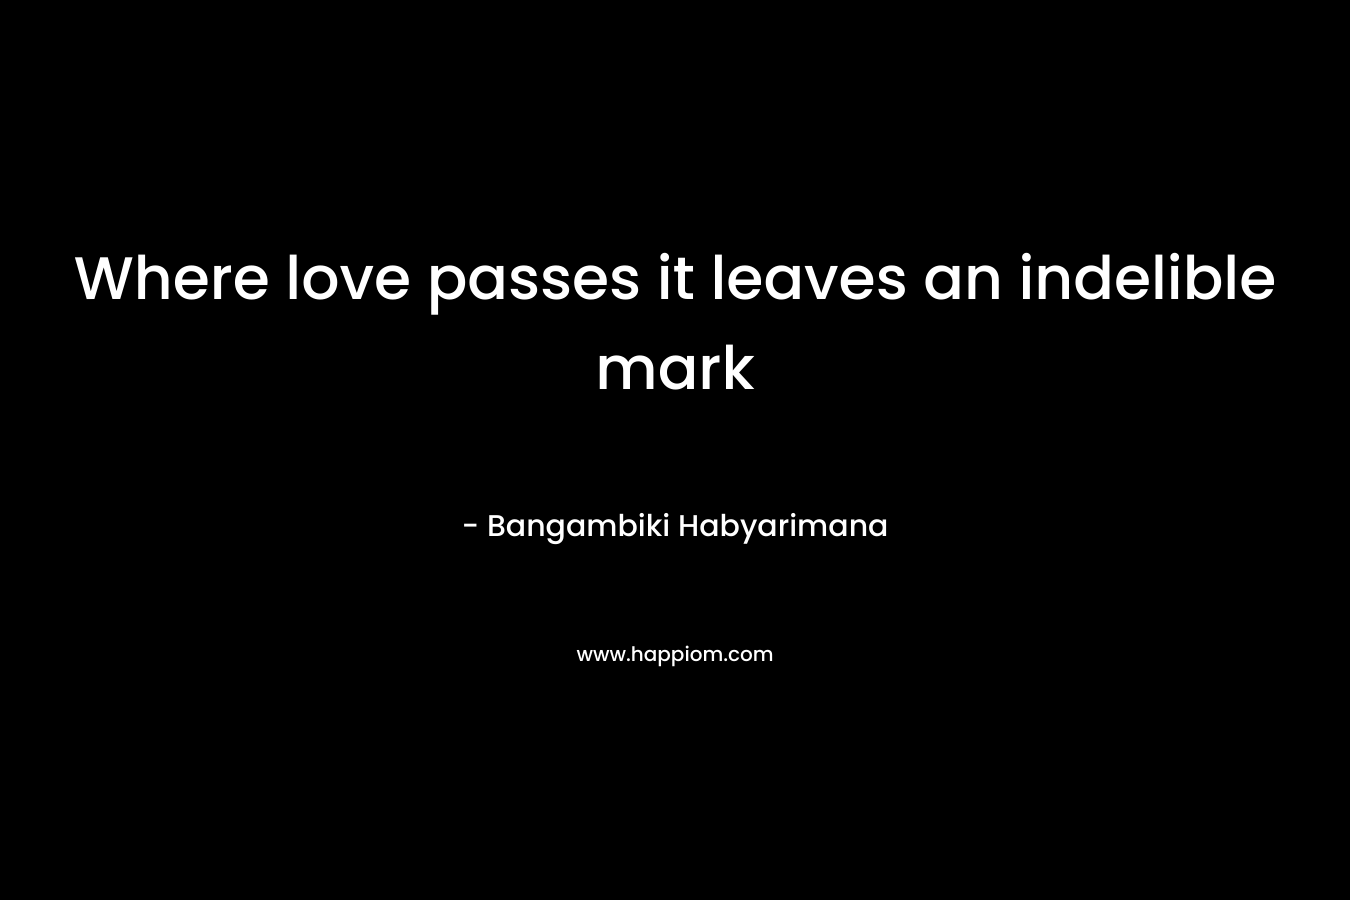 Where love passes it leaves an indelible mark